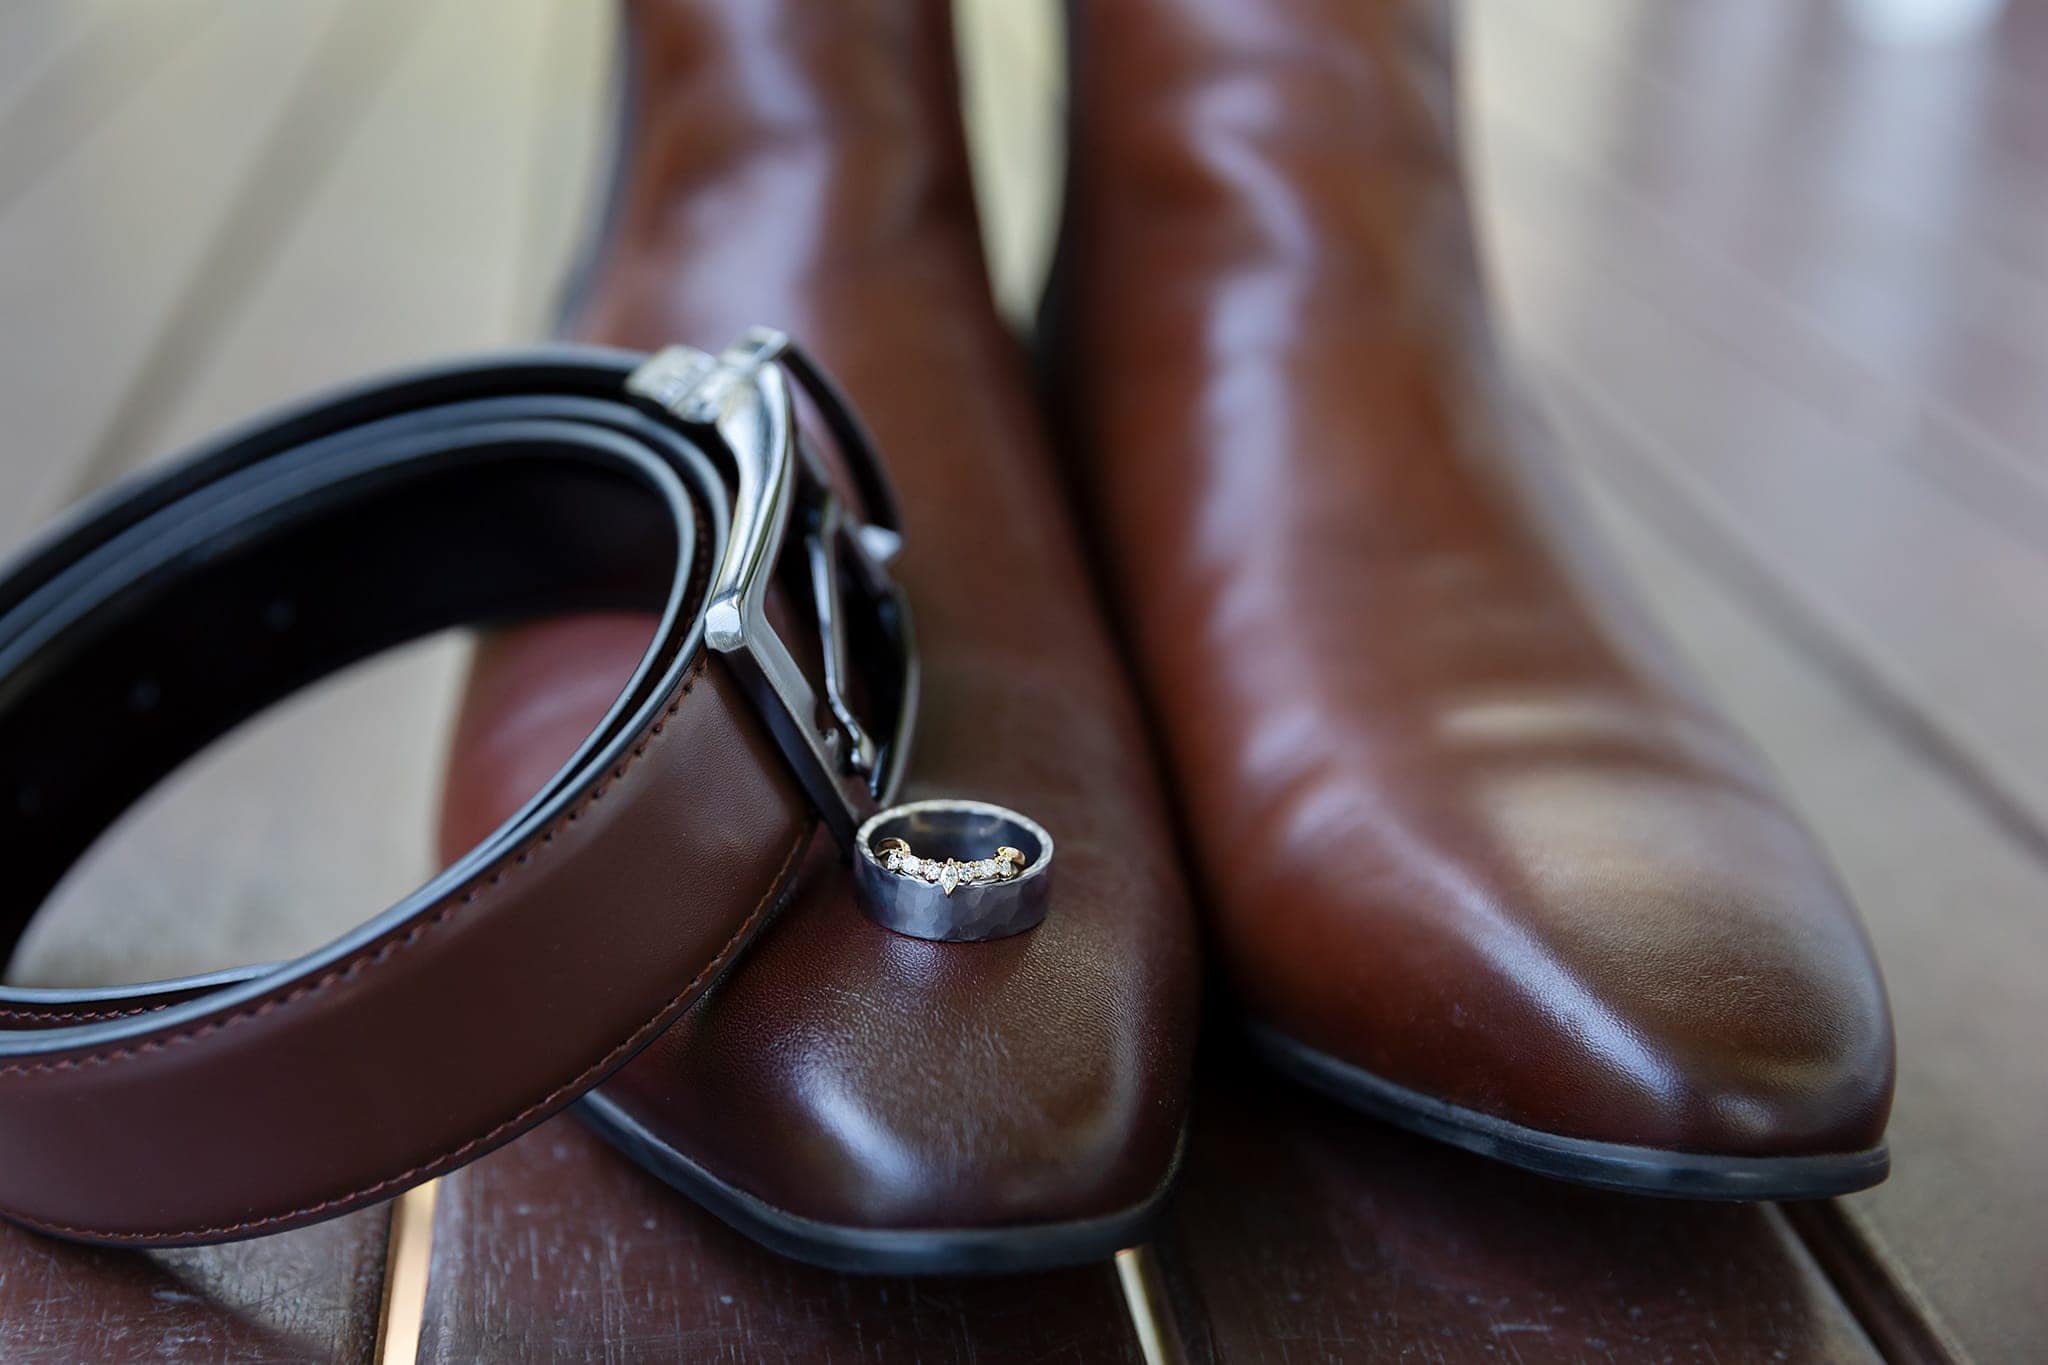 Grooms preparations with ring and belt on shoes